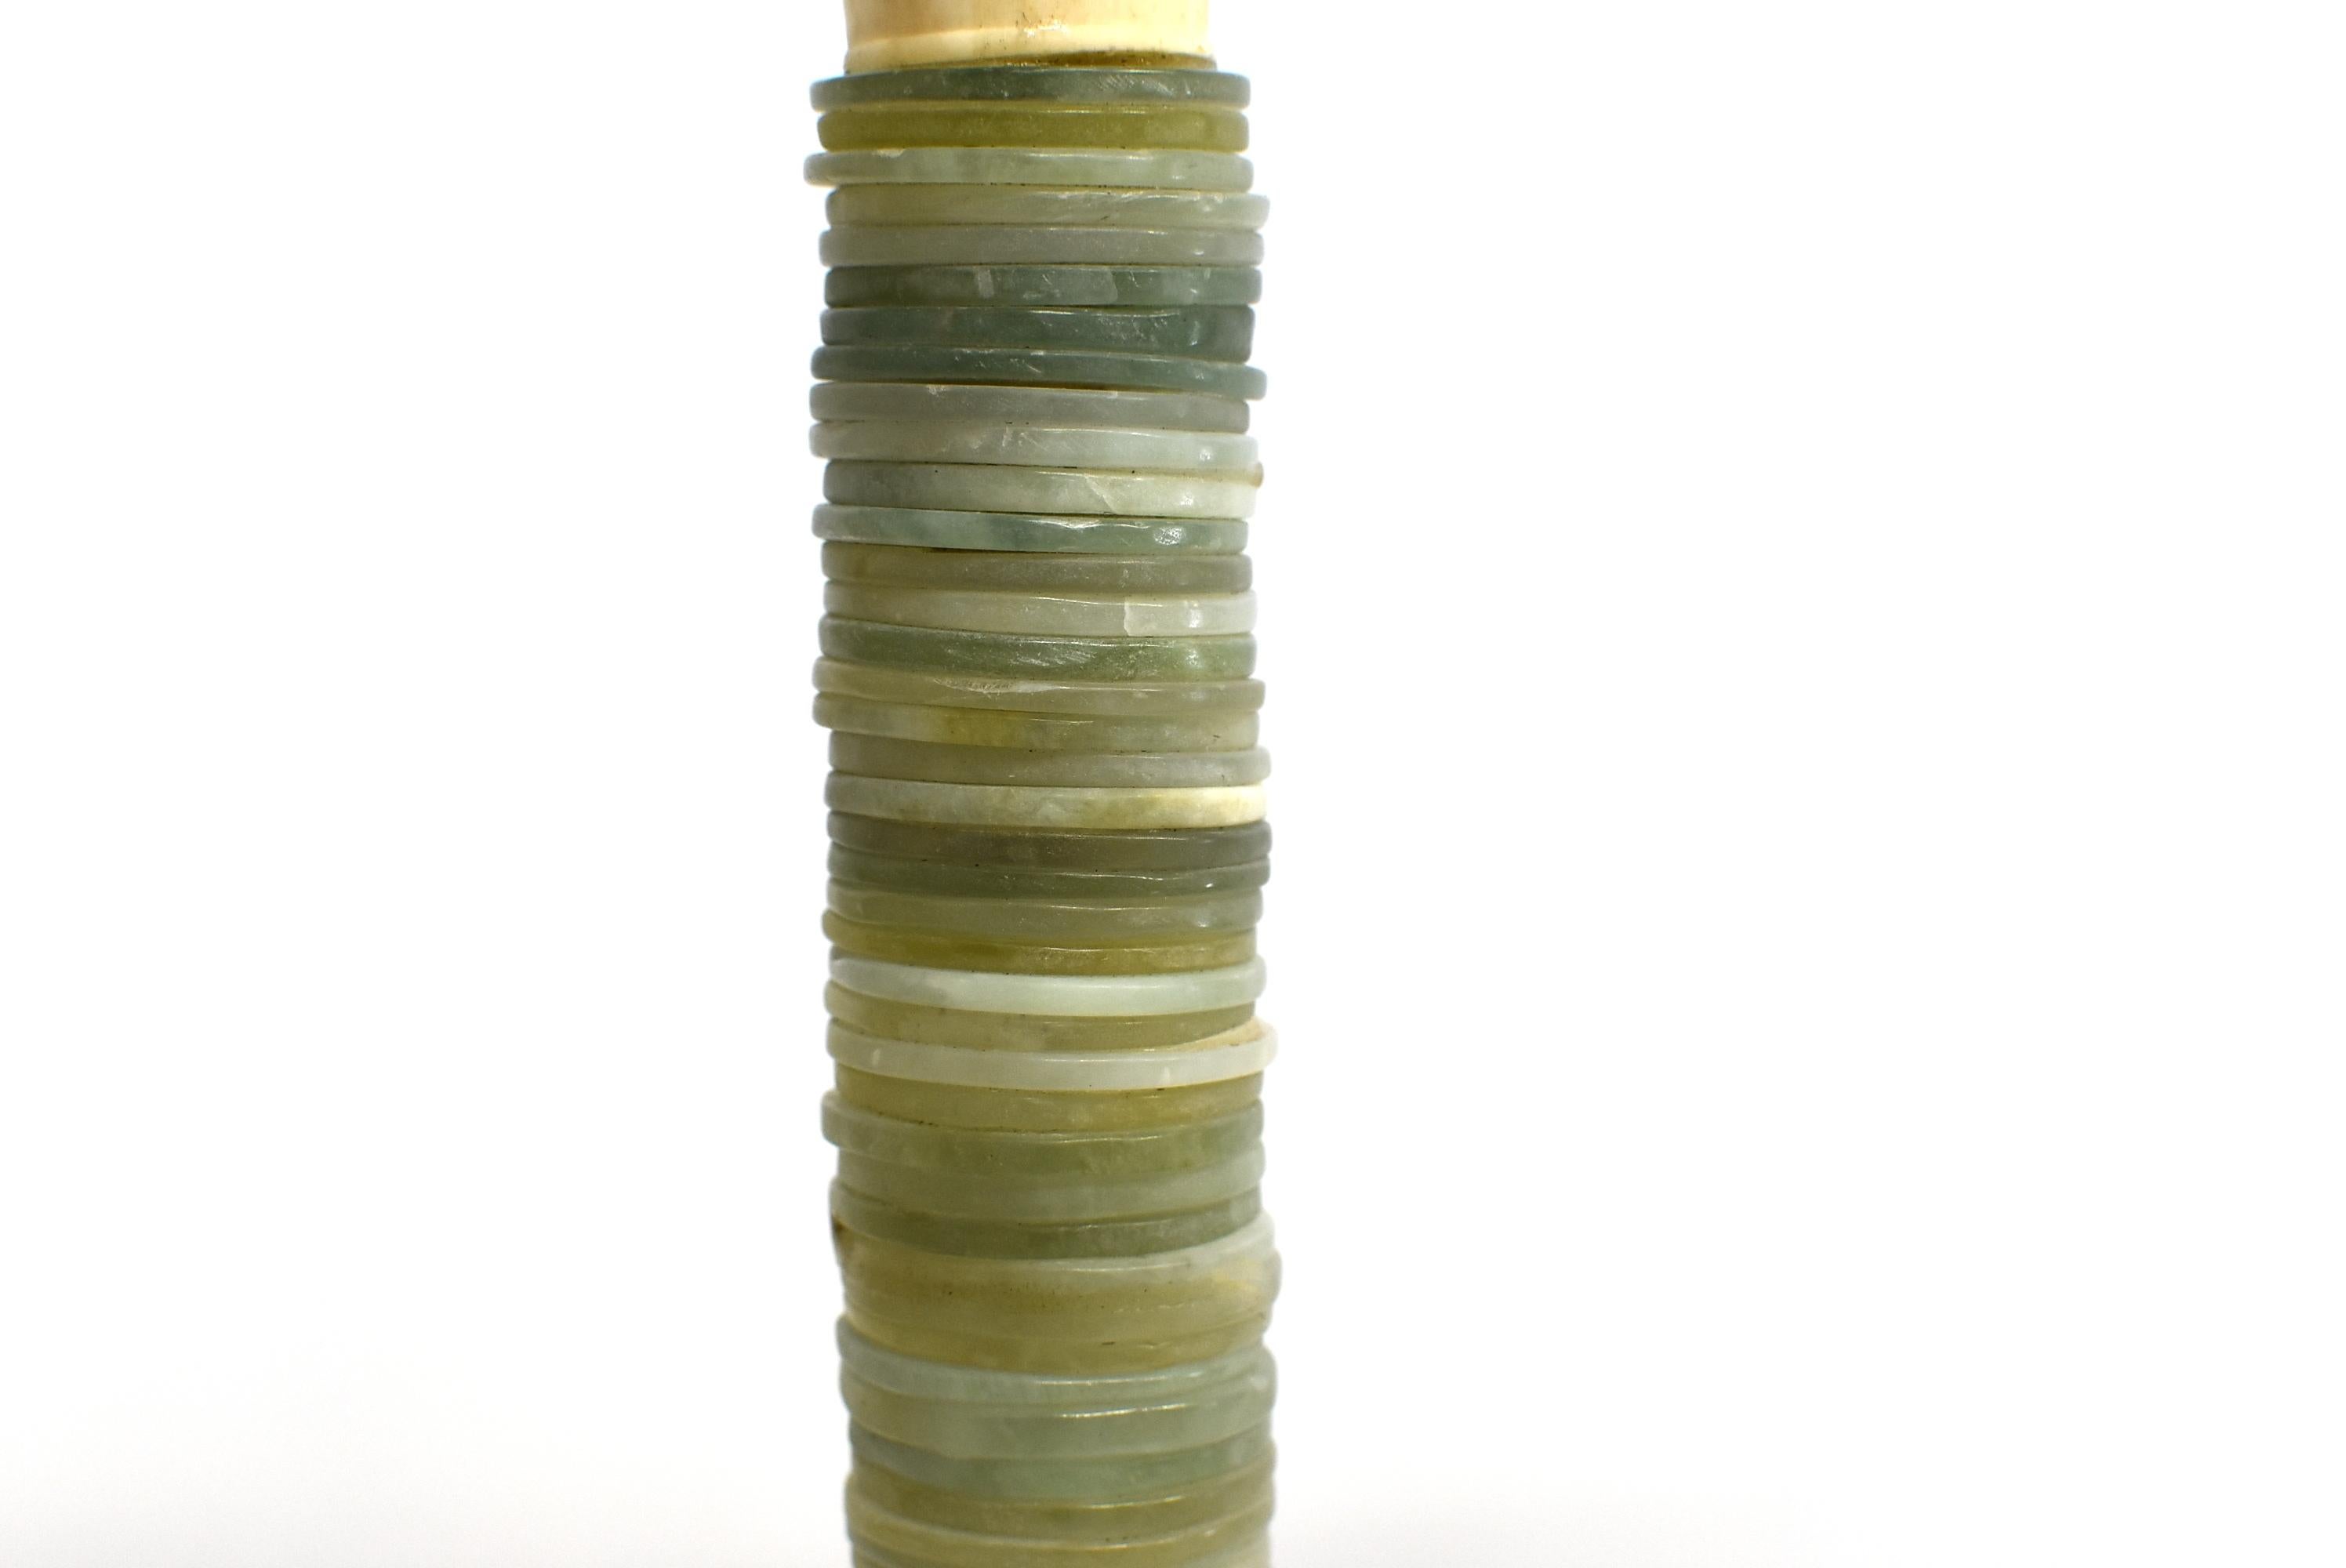 Beautiful large Chinese calligraphy brush with stack of 60 hand carved jade disks. This is an oversize brush displaying a great collection of jade of various color and origin. A very special piece that is both functional as a painting or